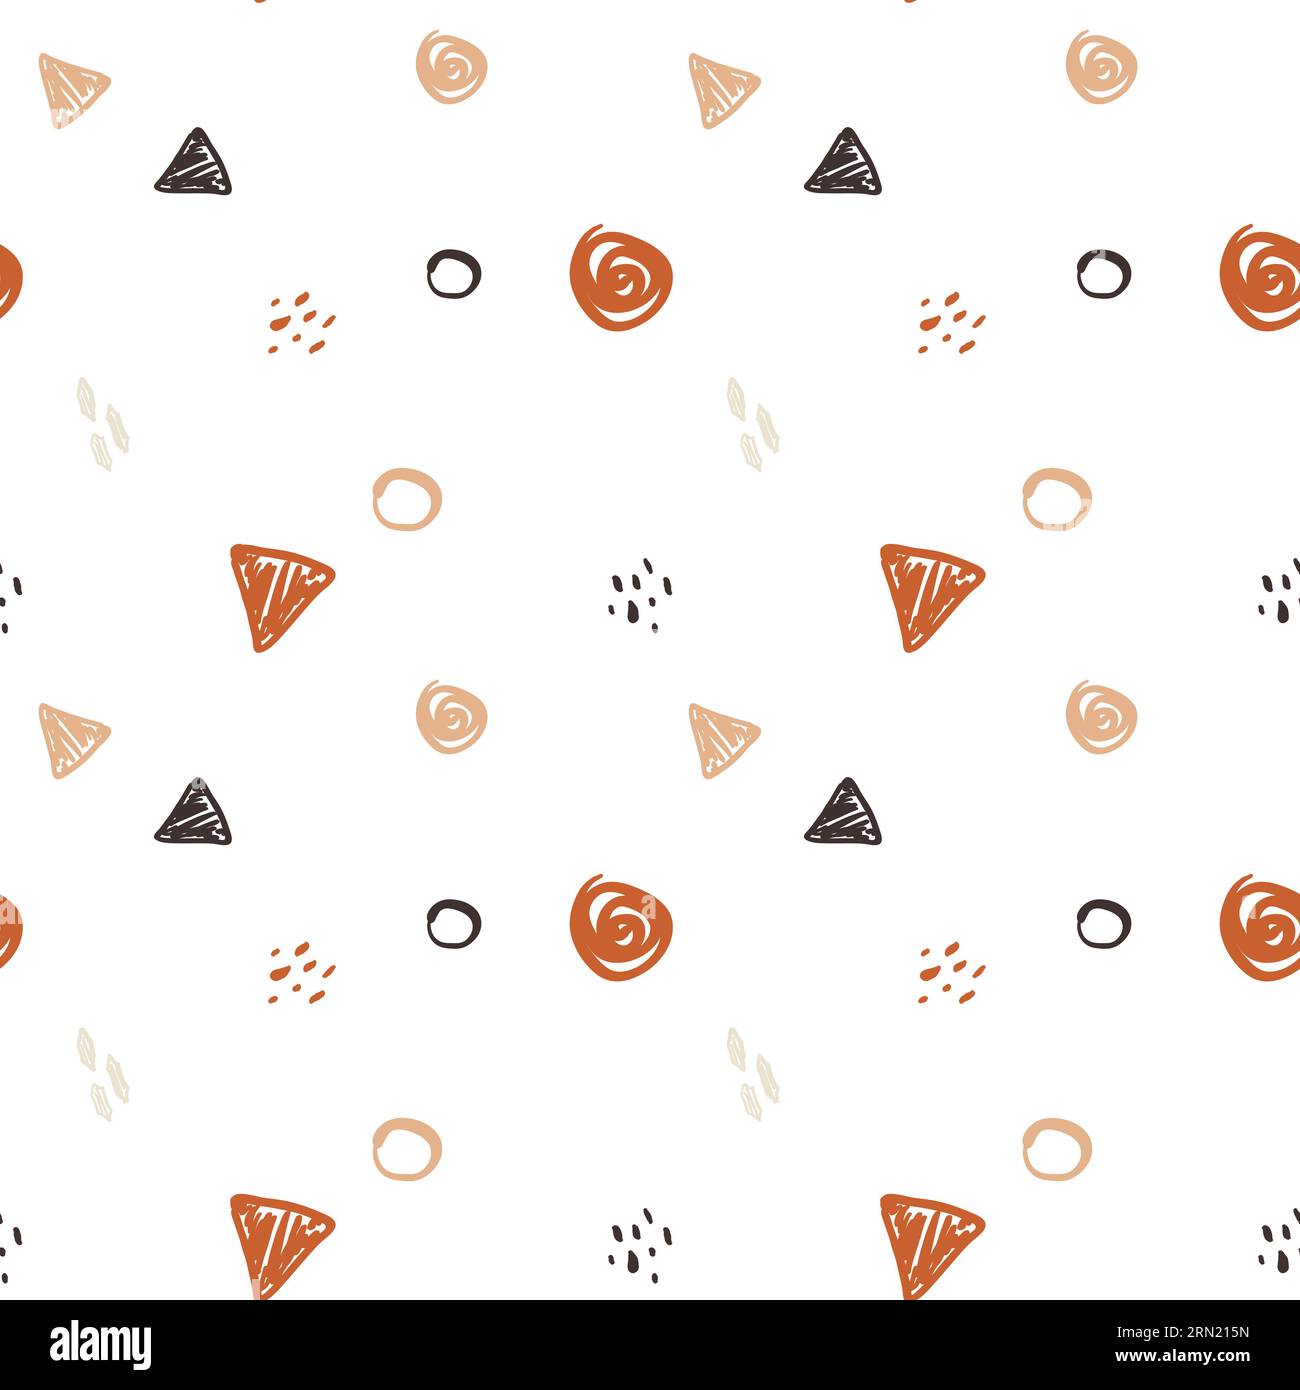 Hand drawn seamless pattern with soft beige, orange and dark grey cute childish elements. Doodle kiddish icons in nice pattern isolated on white backg Stock Vector